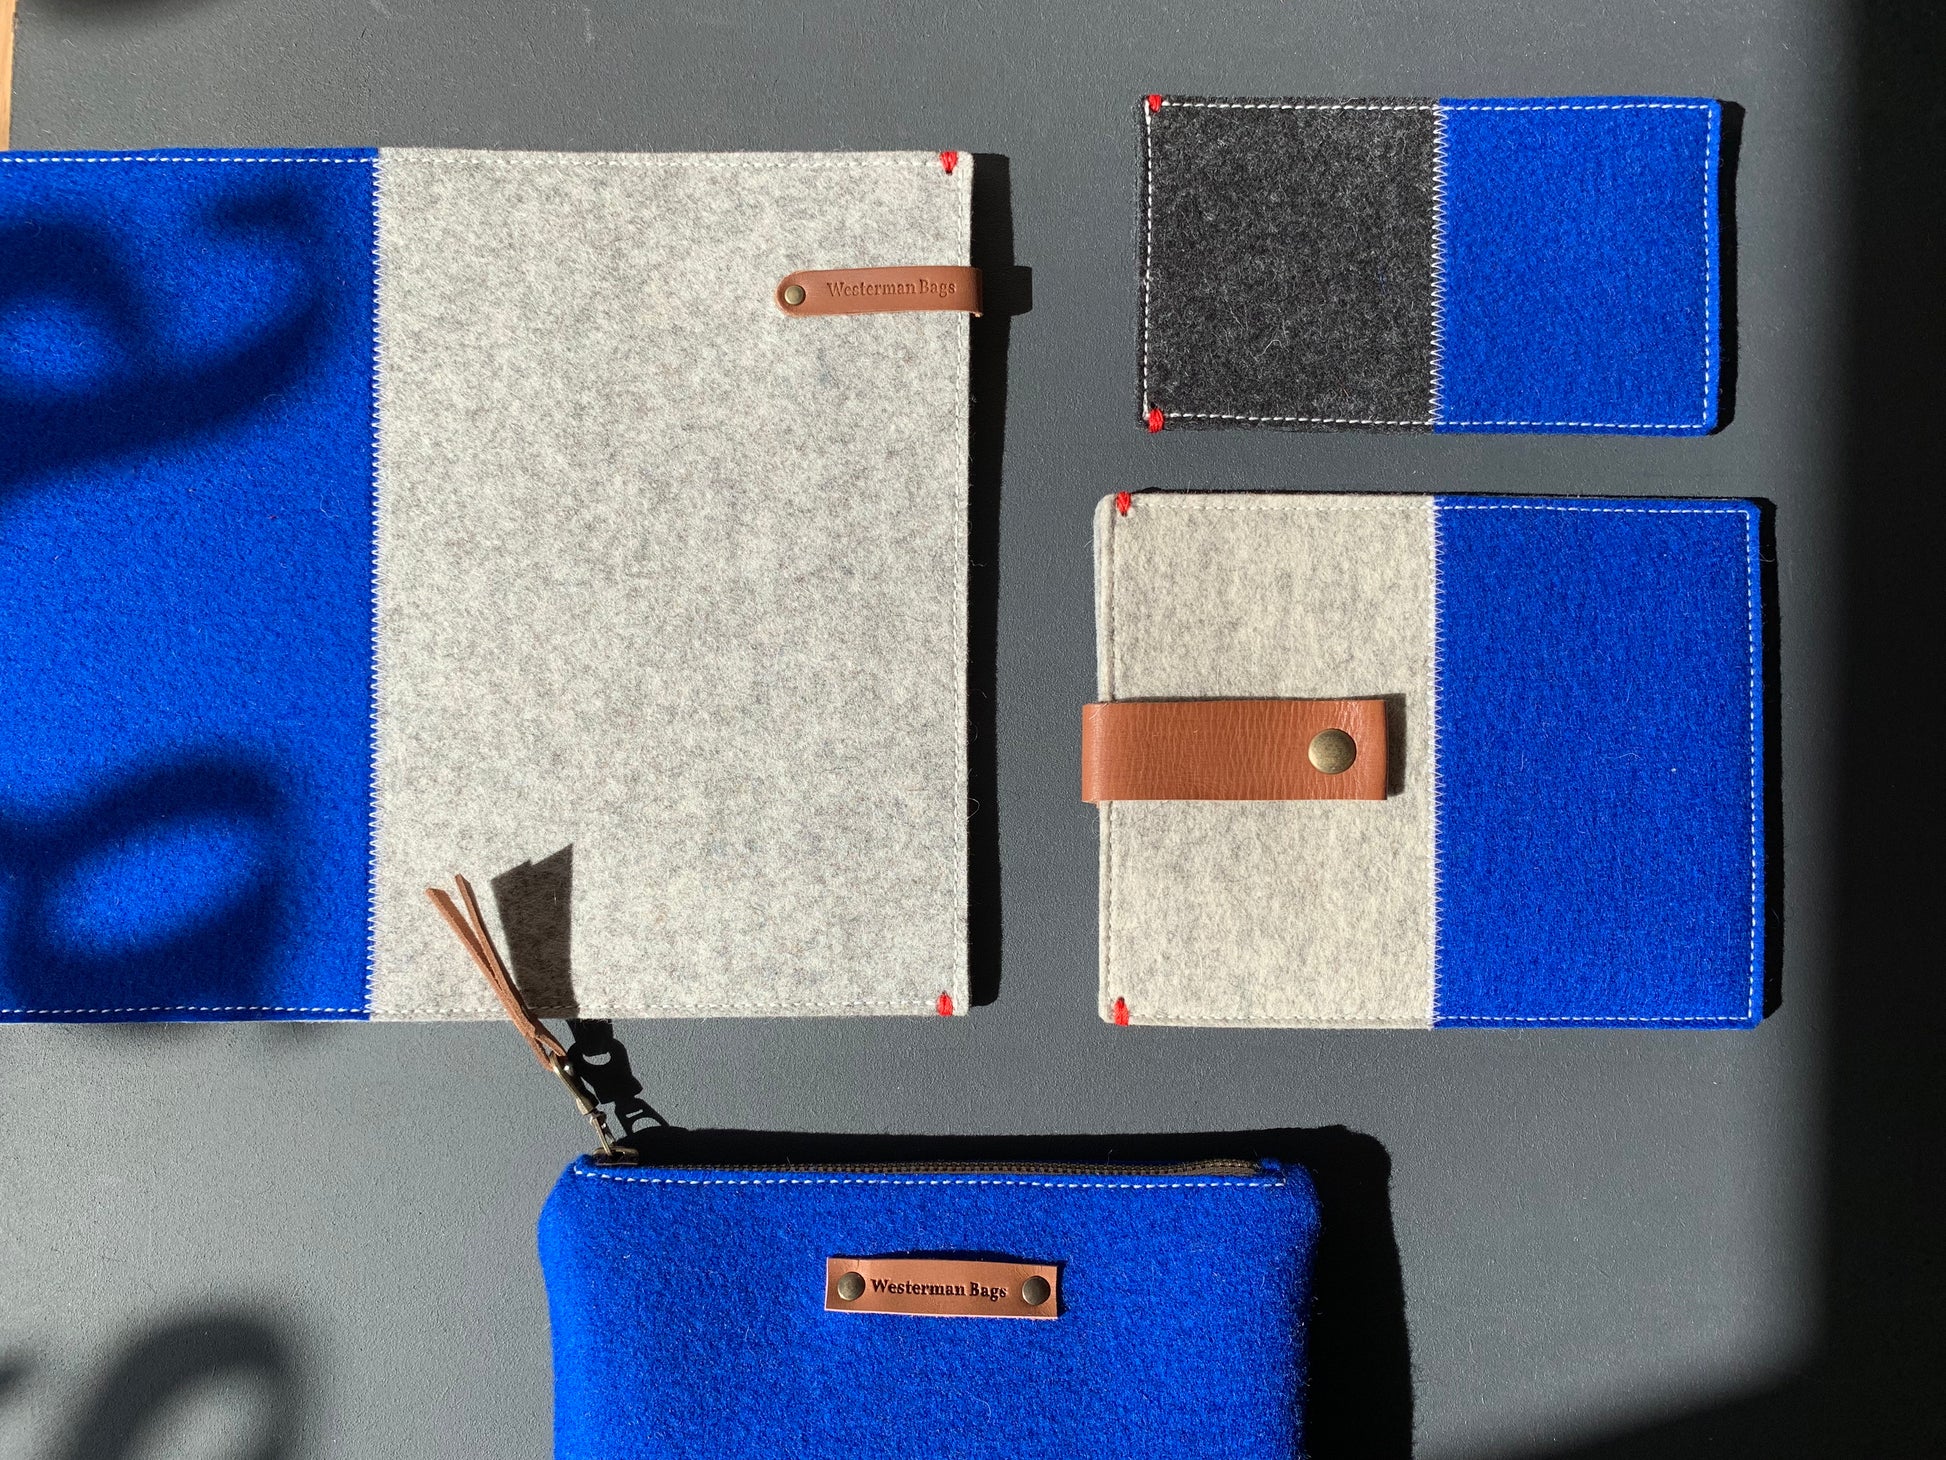 Blue wool felt accessories collection - pencil case, eraser case, iPad case by Westerman bags